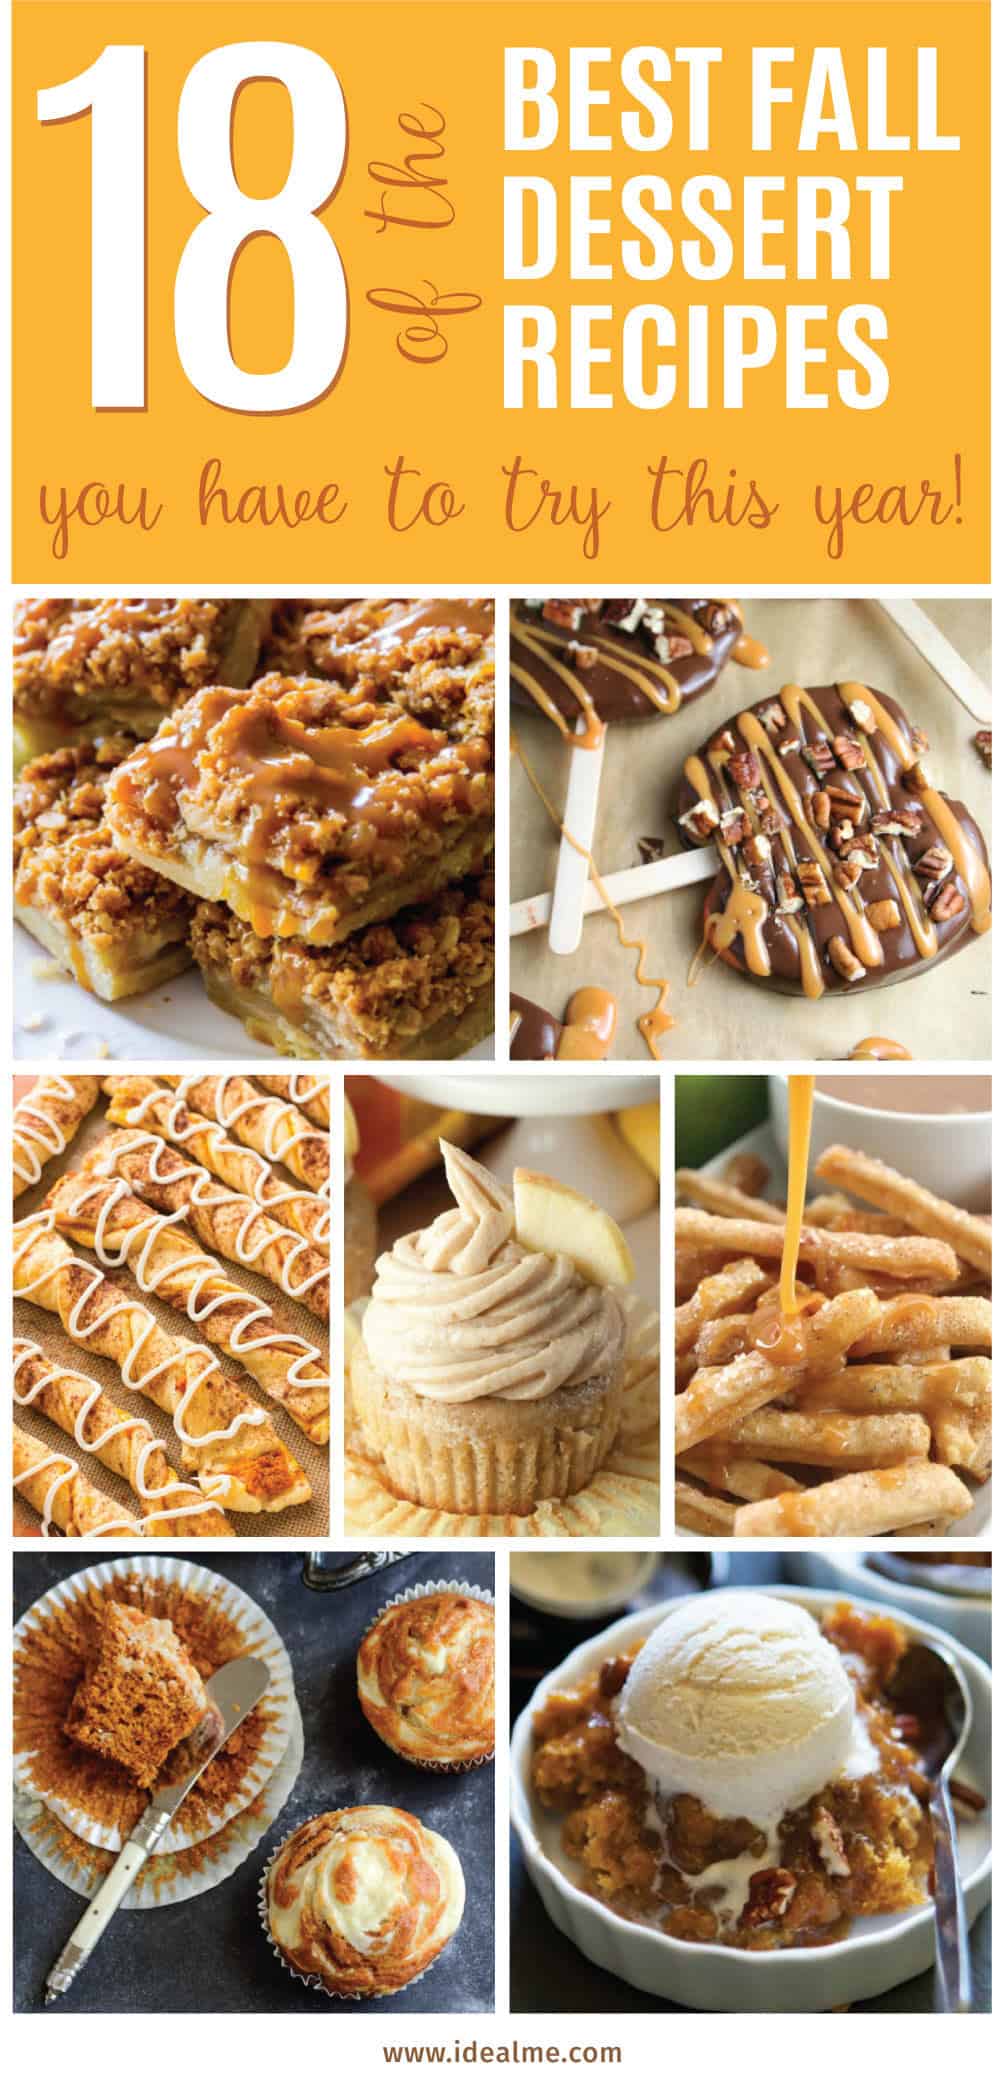 These Fall recipes are perfect for the holidays and for any time you want to bring the delicious smells of apple, cinnamon, and pumpkin into your home. You're guaranteed to find a fall flavor you love with these 18 delicious fall dessert recipes.